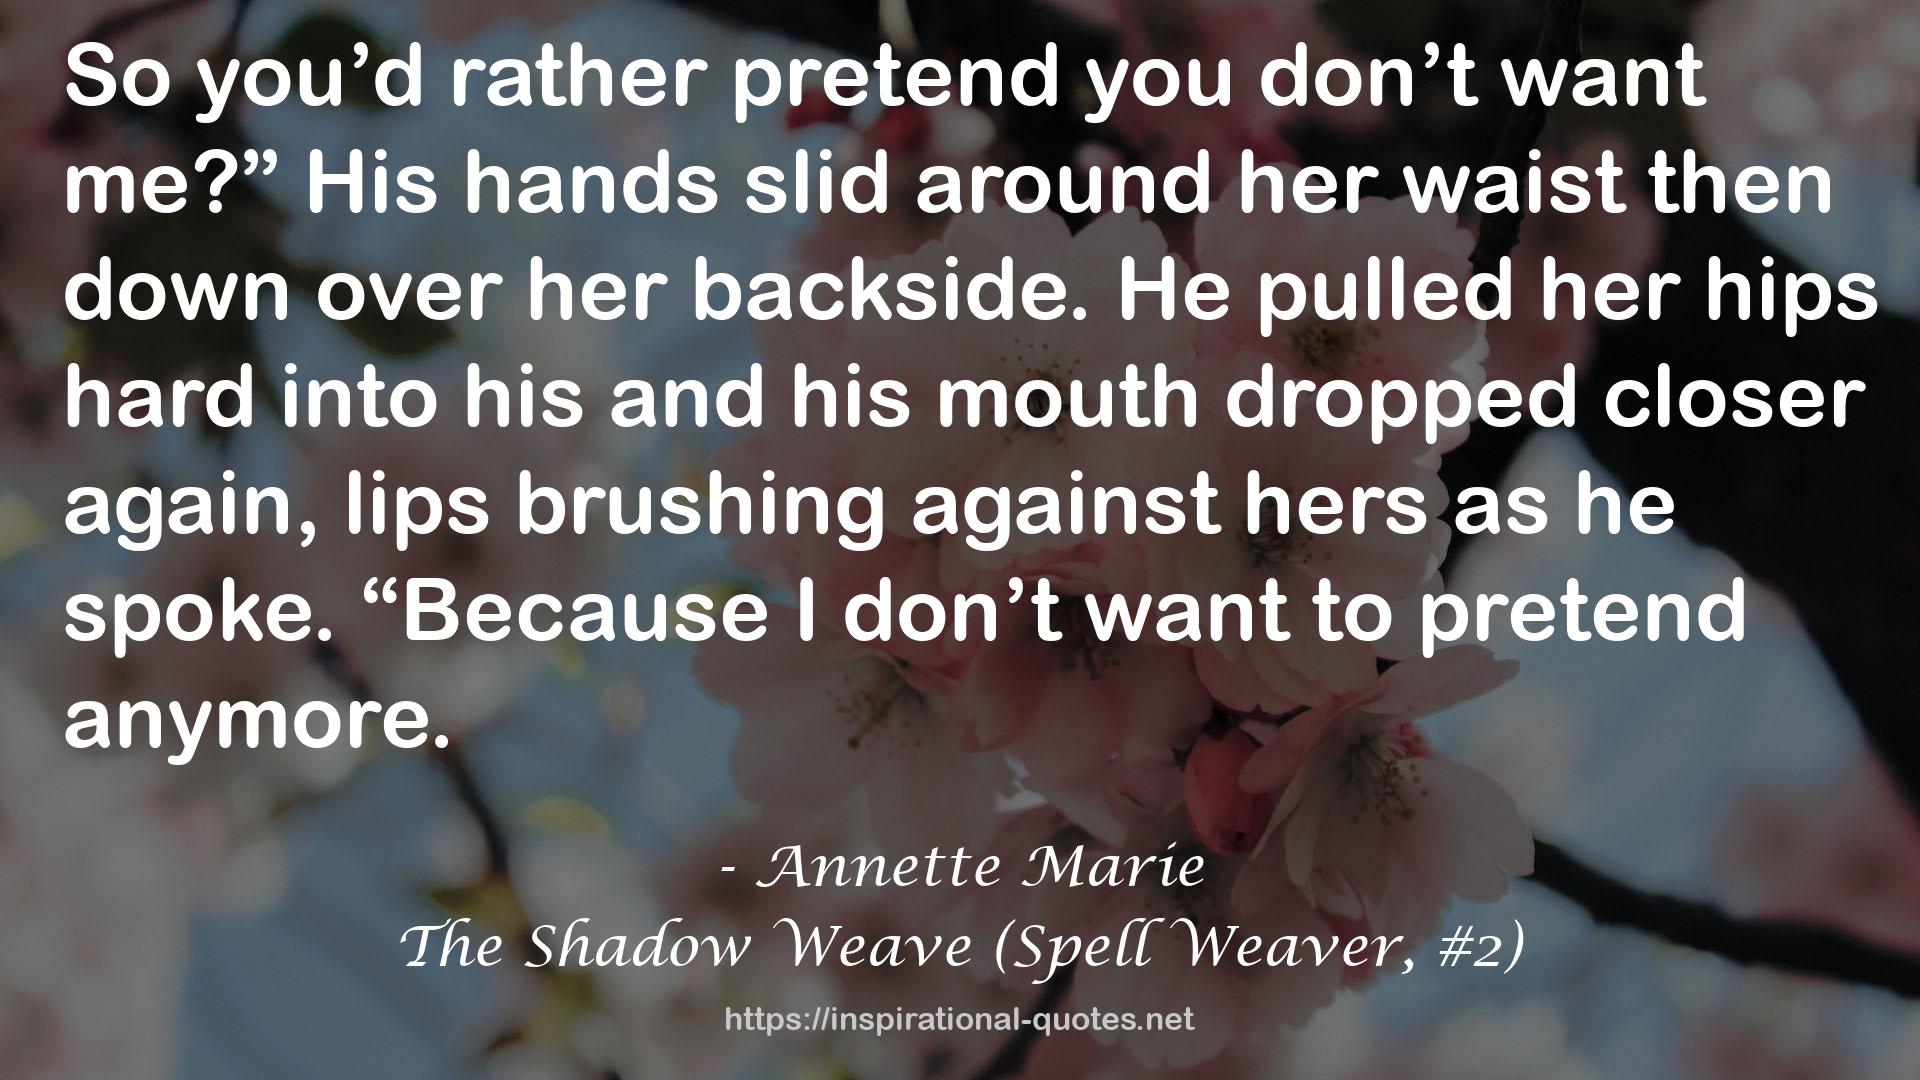 The Shadow Weave (Spell Weaver, #2) QUOTES